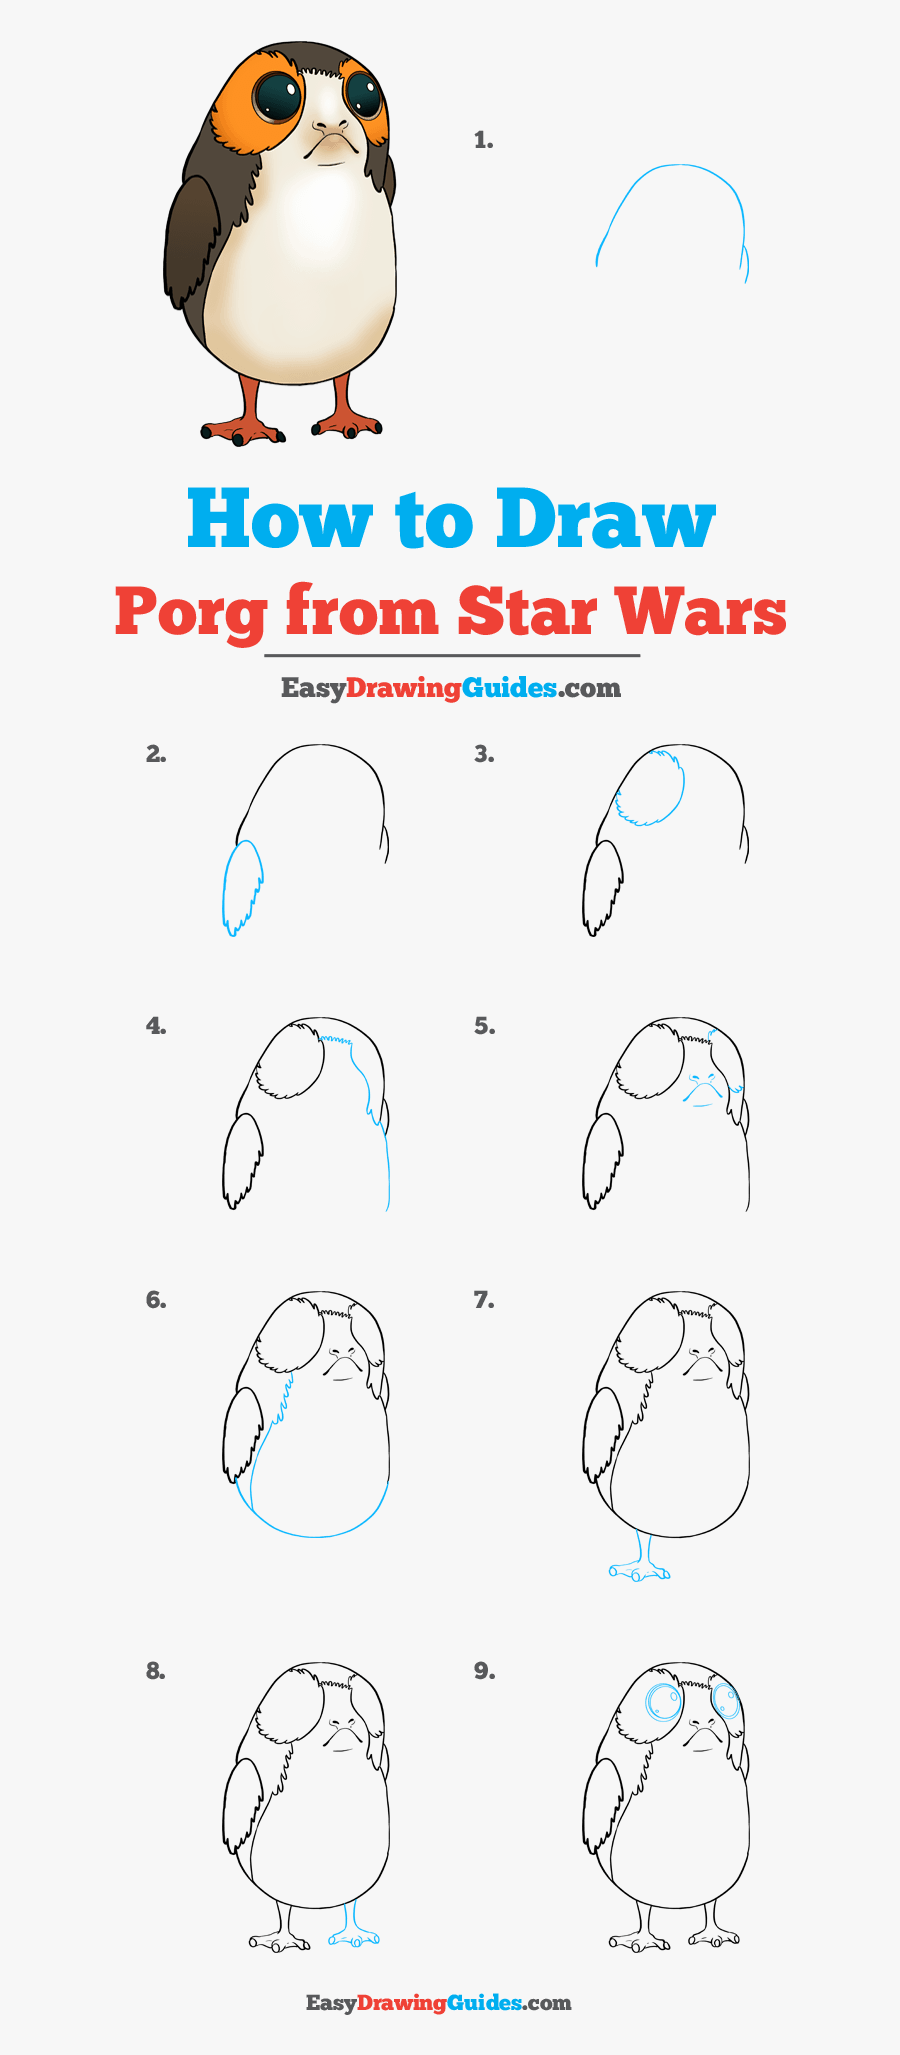 How To Draw Porg From Star Wars - Star Wars Easy Drawing, Transparent Clipart